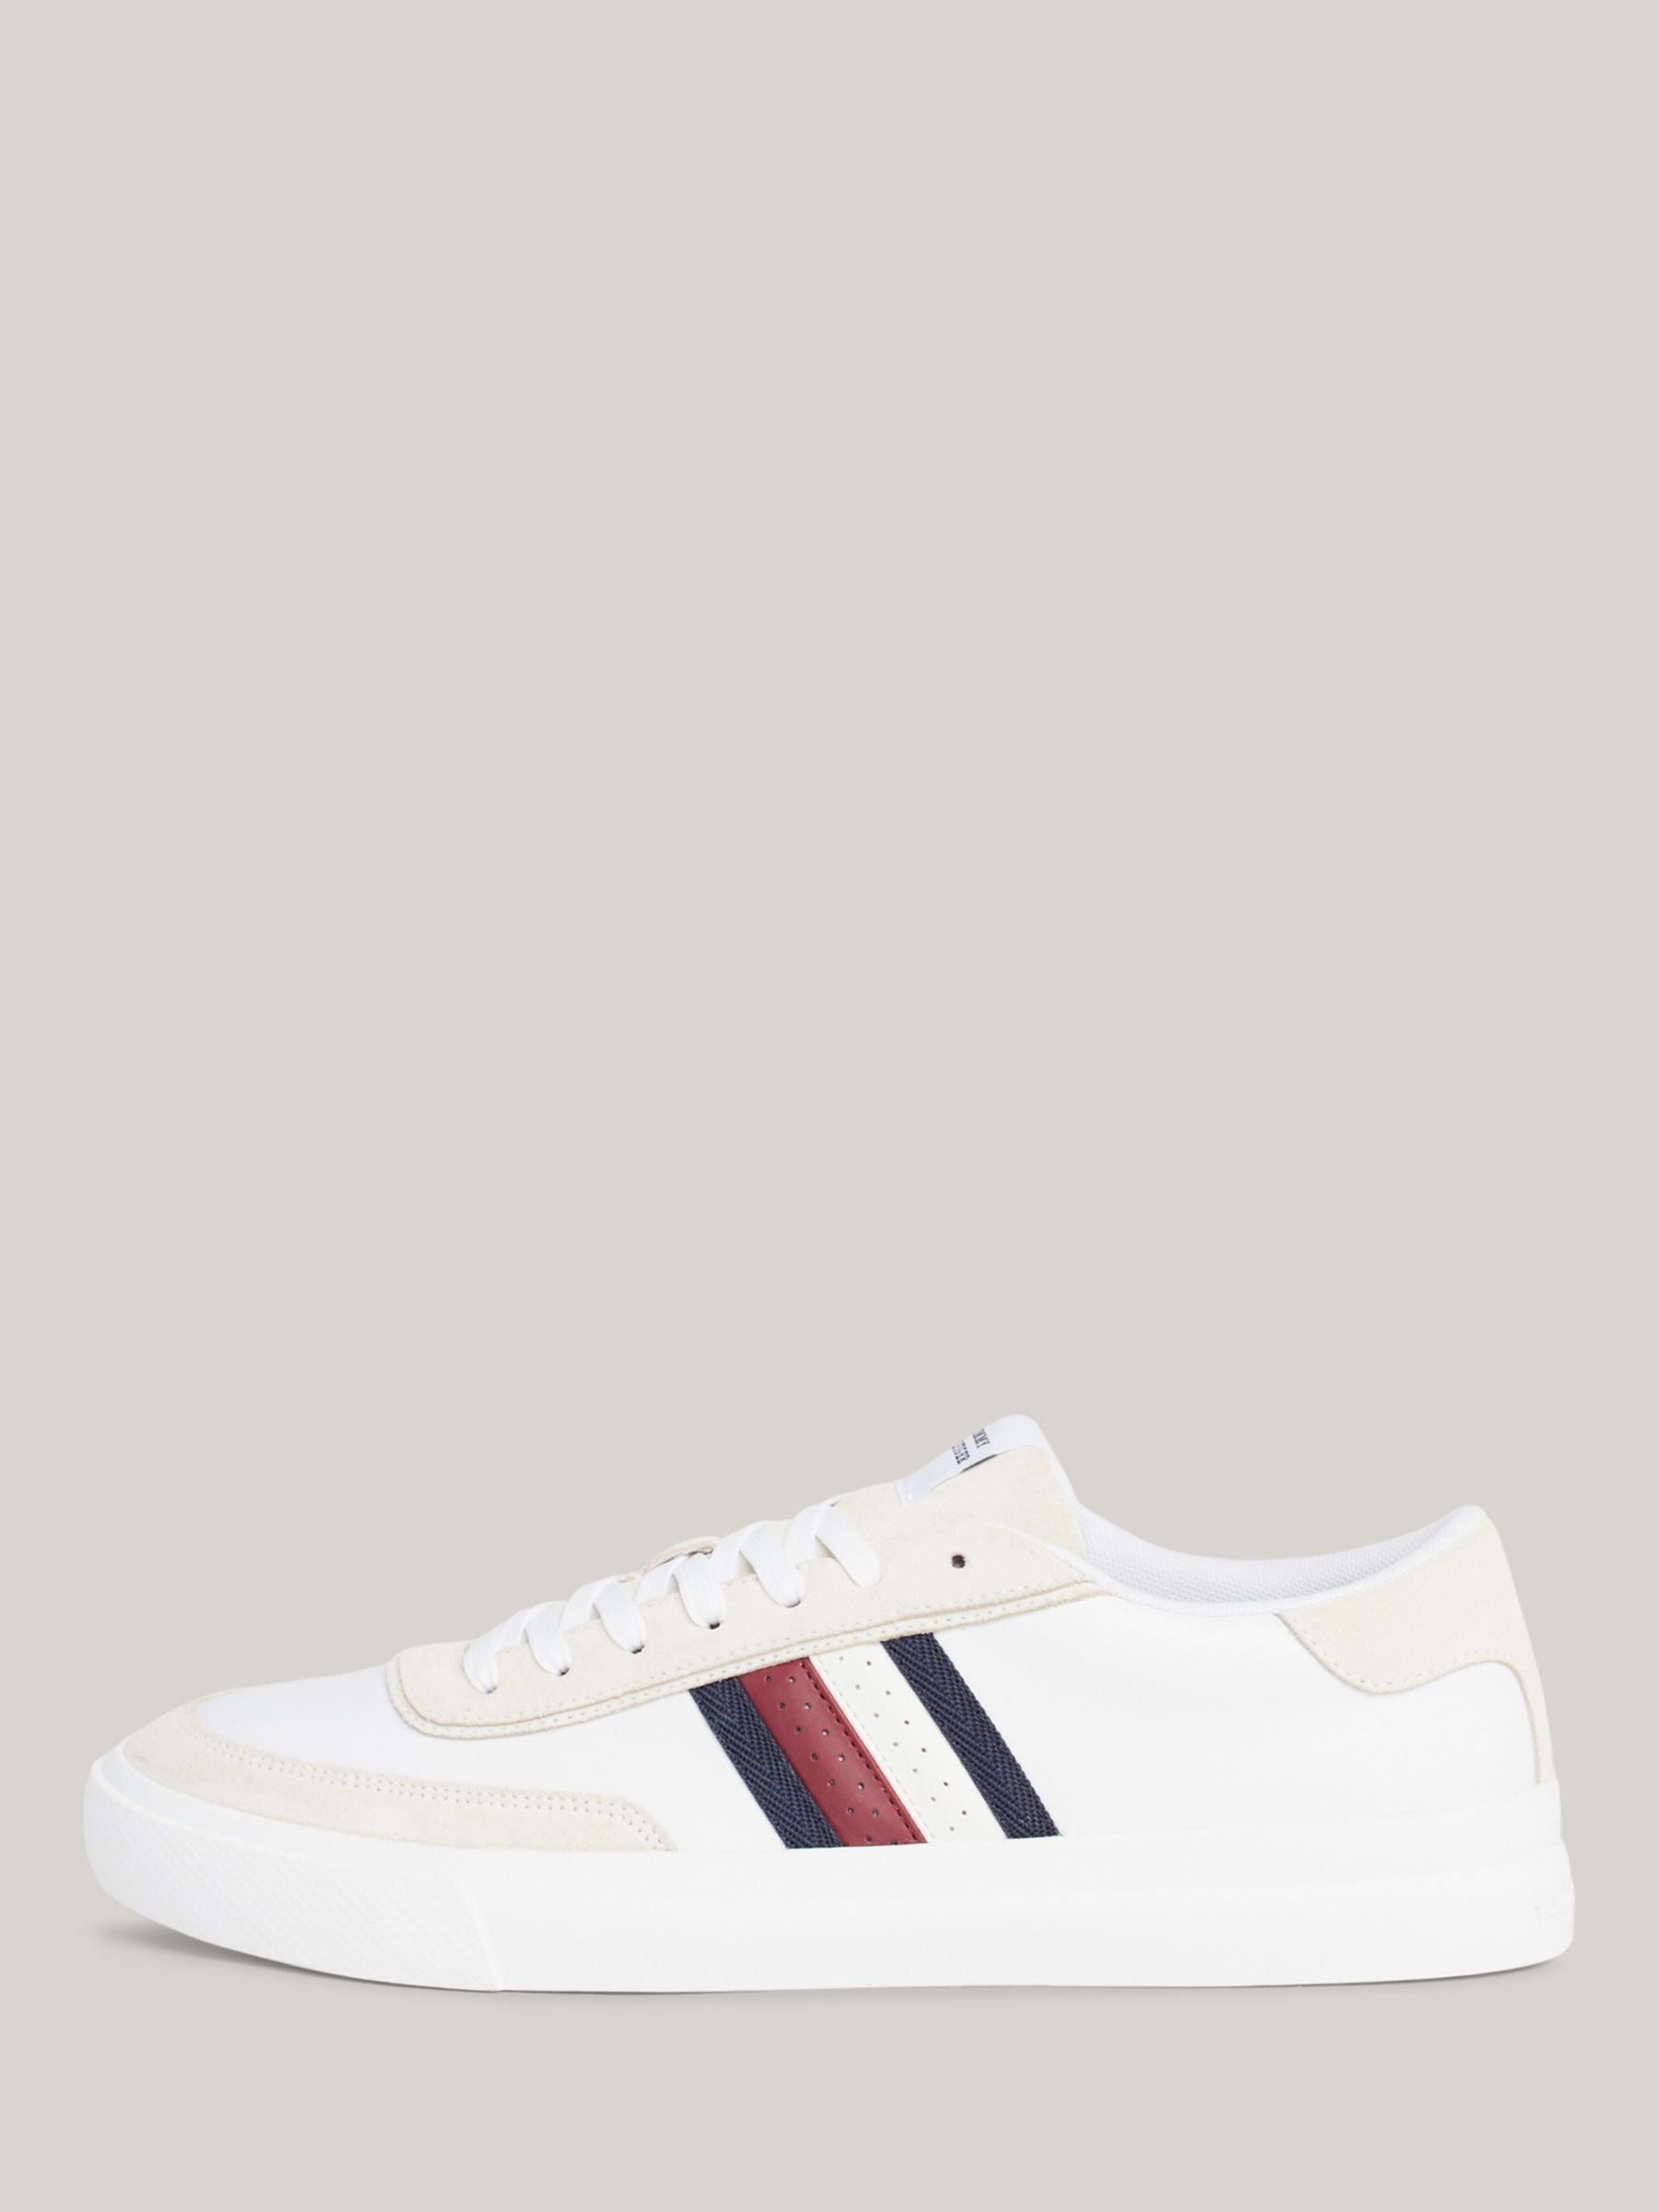 Tommy Hilfiger Cupsole Leather Low Top Trainers, White, EU41